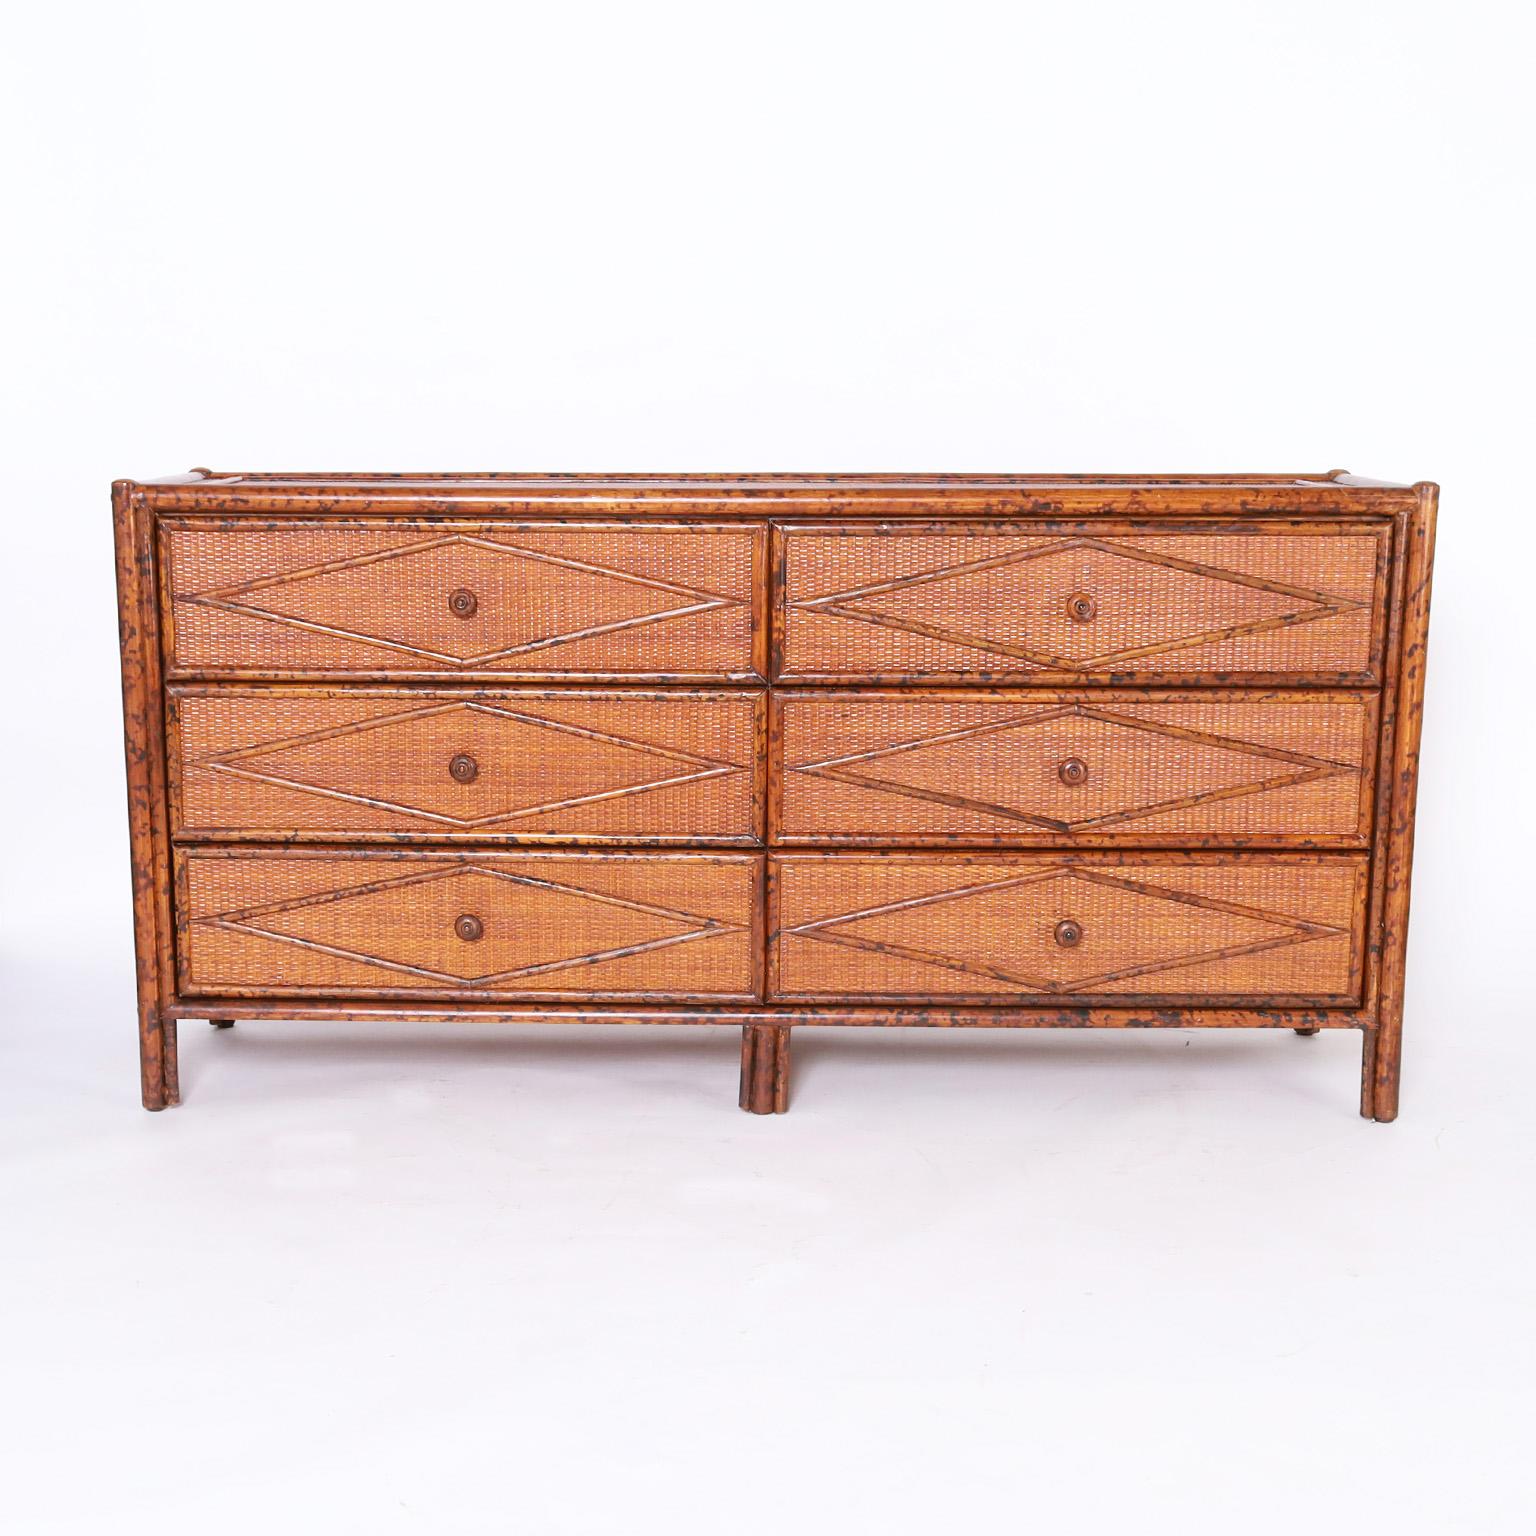 Handsome midcentury British Colonial style chest of drawers having six drawers crafted with a faux bamboo frame, grasscloth panels all around and applied geometric design in rattan.